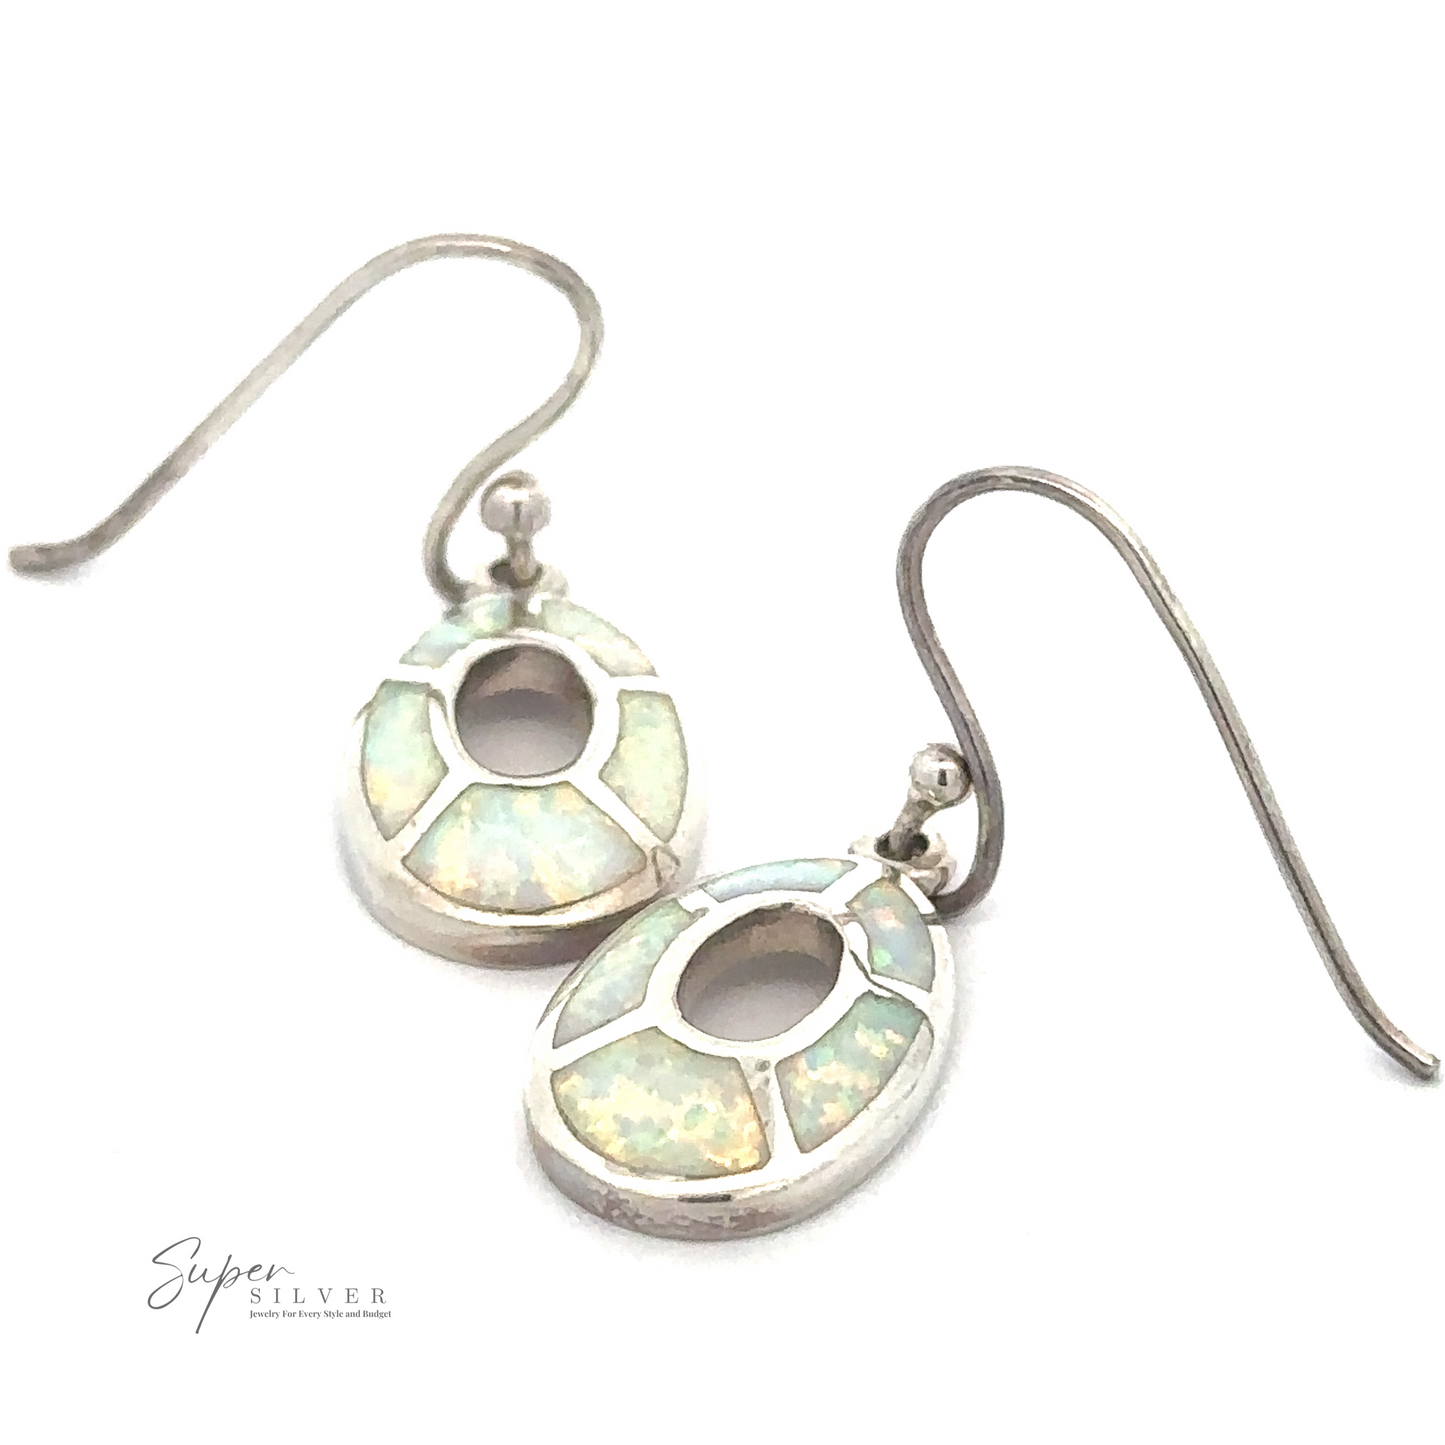 A pair of sterling silver earrings with an intricate design featuring light blue and white gemstone inlays, displayed on a white background. The brand name "Super Silver" is visible in the corner, highlighting these elegant Small Drop Shape Dangle Earrings.